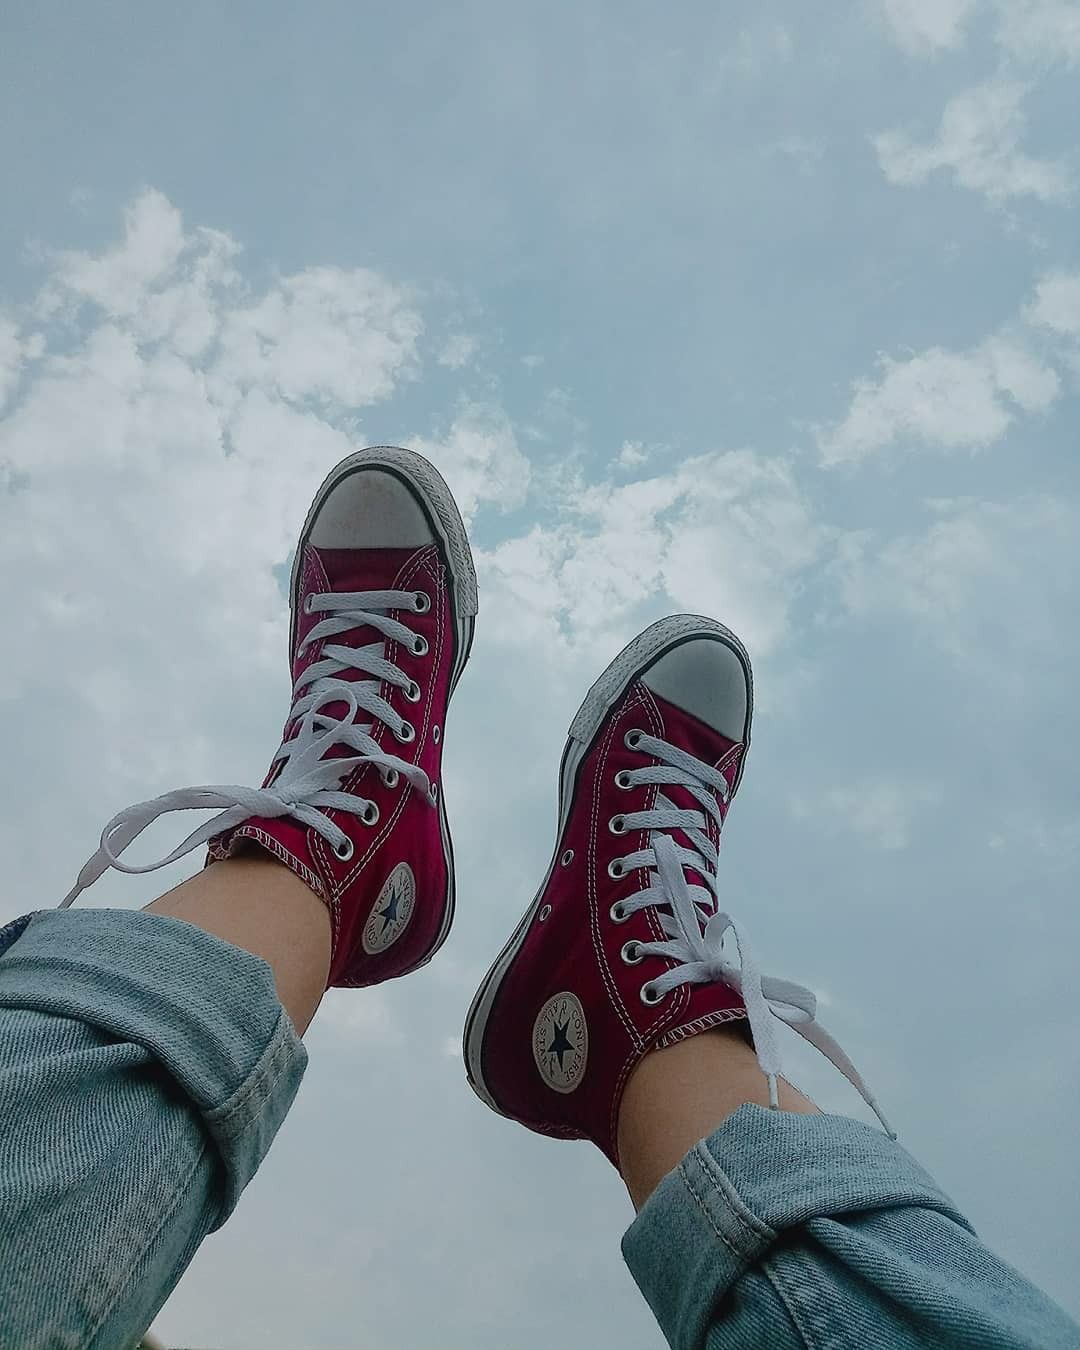 Converse Aesthetic. Aesthetic shoes, Sneakers wallpaper, Converse aesthetic